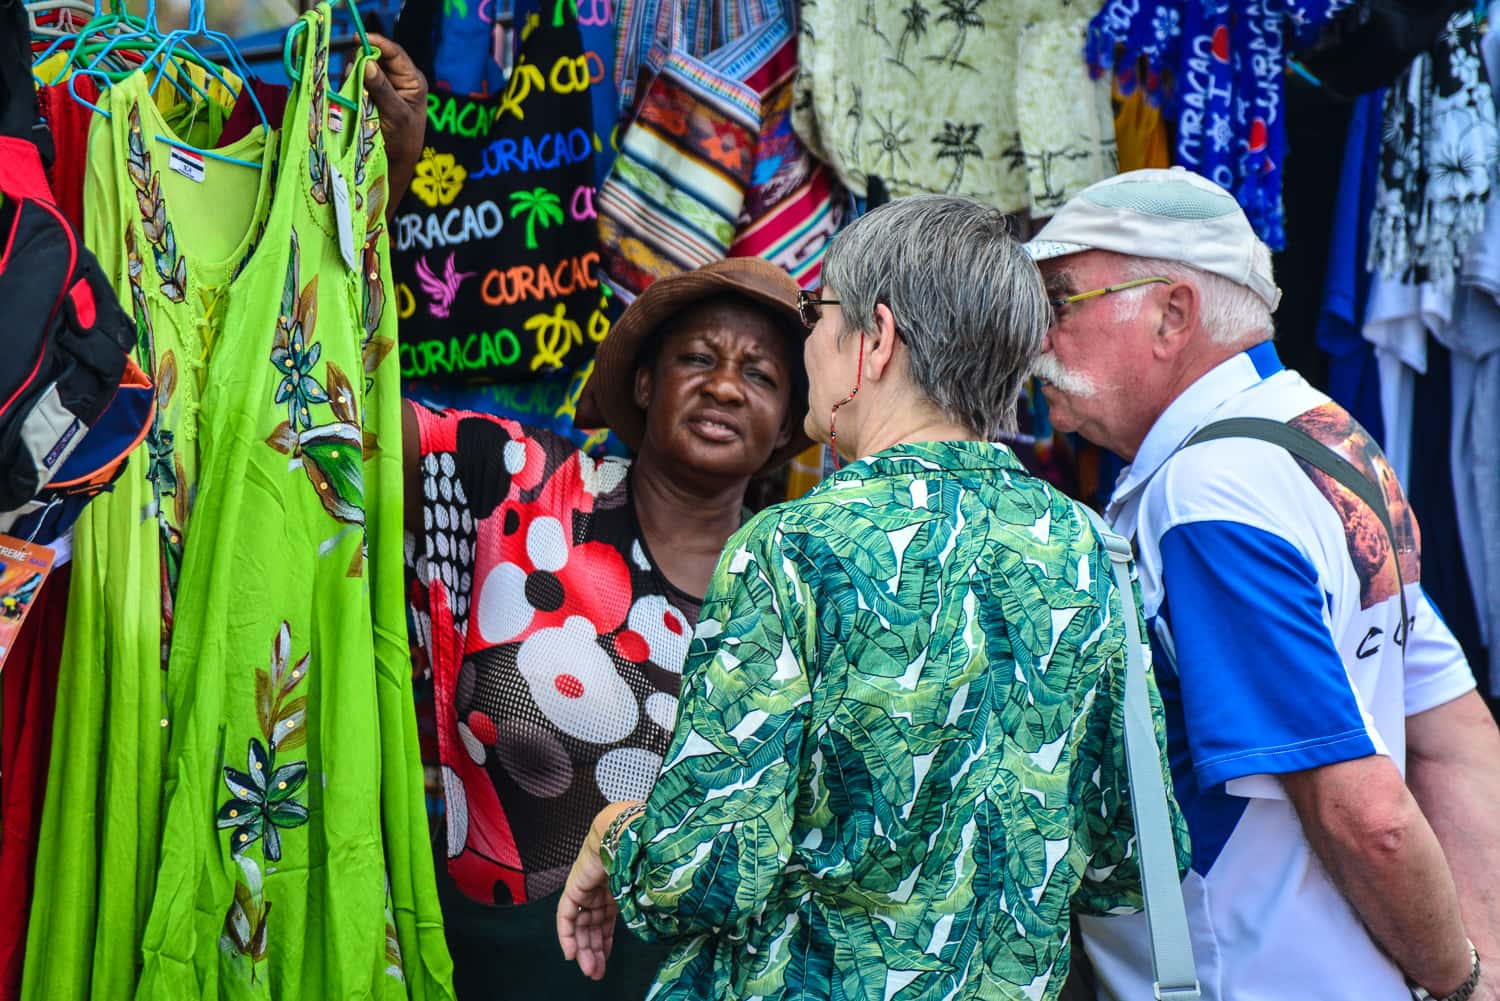 Most of the market stalls sell clothes - always popular.